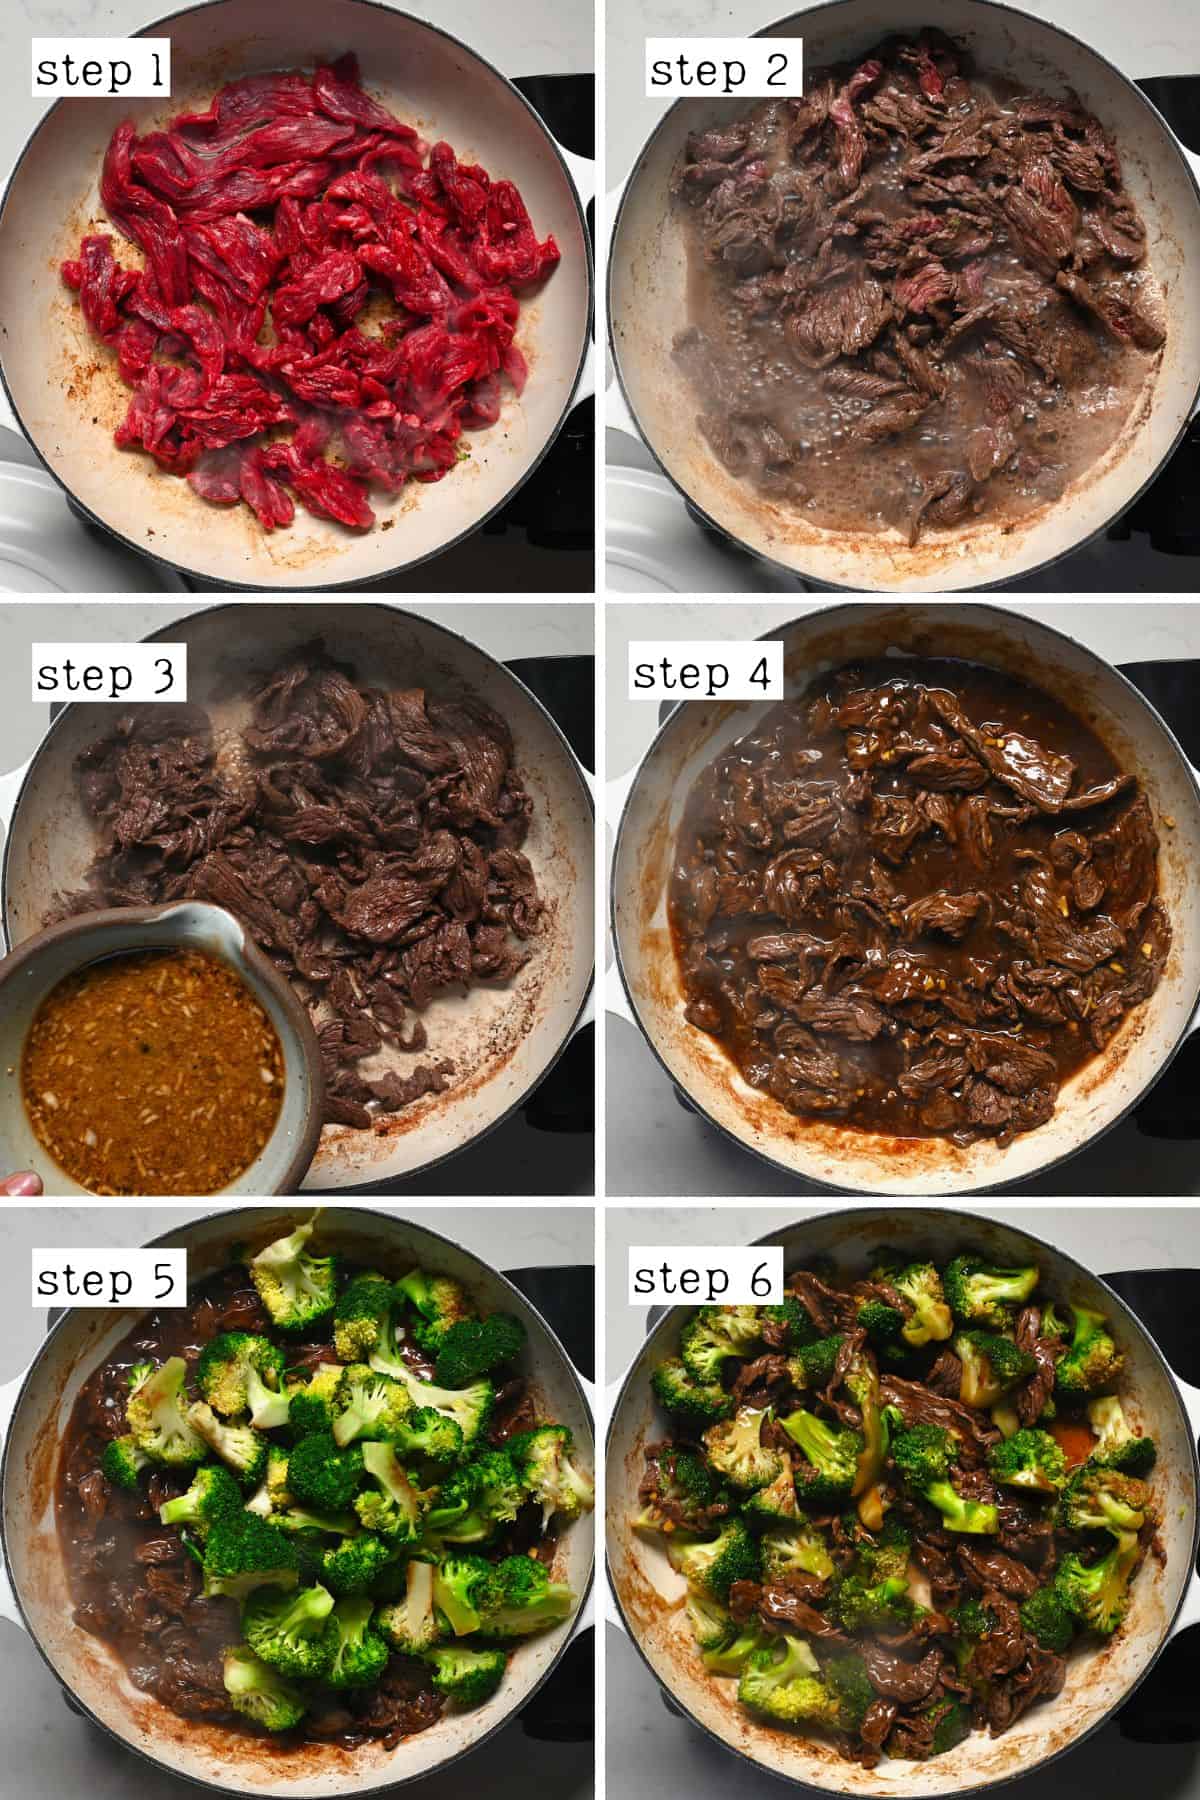 Steps for making beef and broccoli stir fry